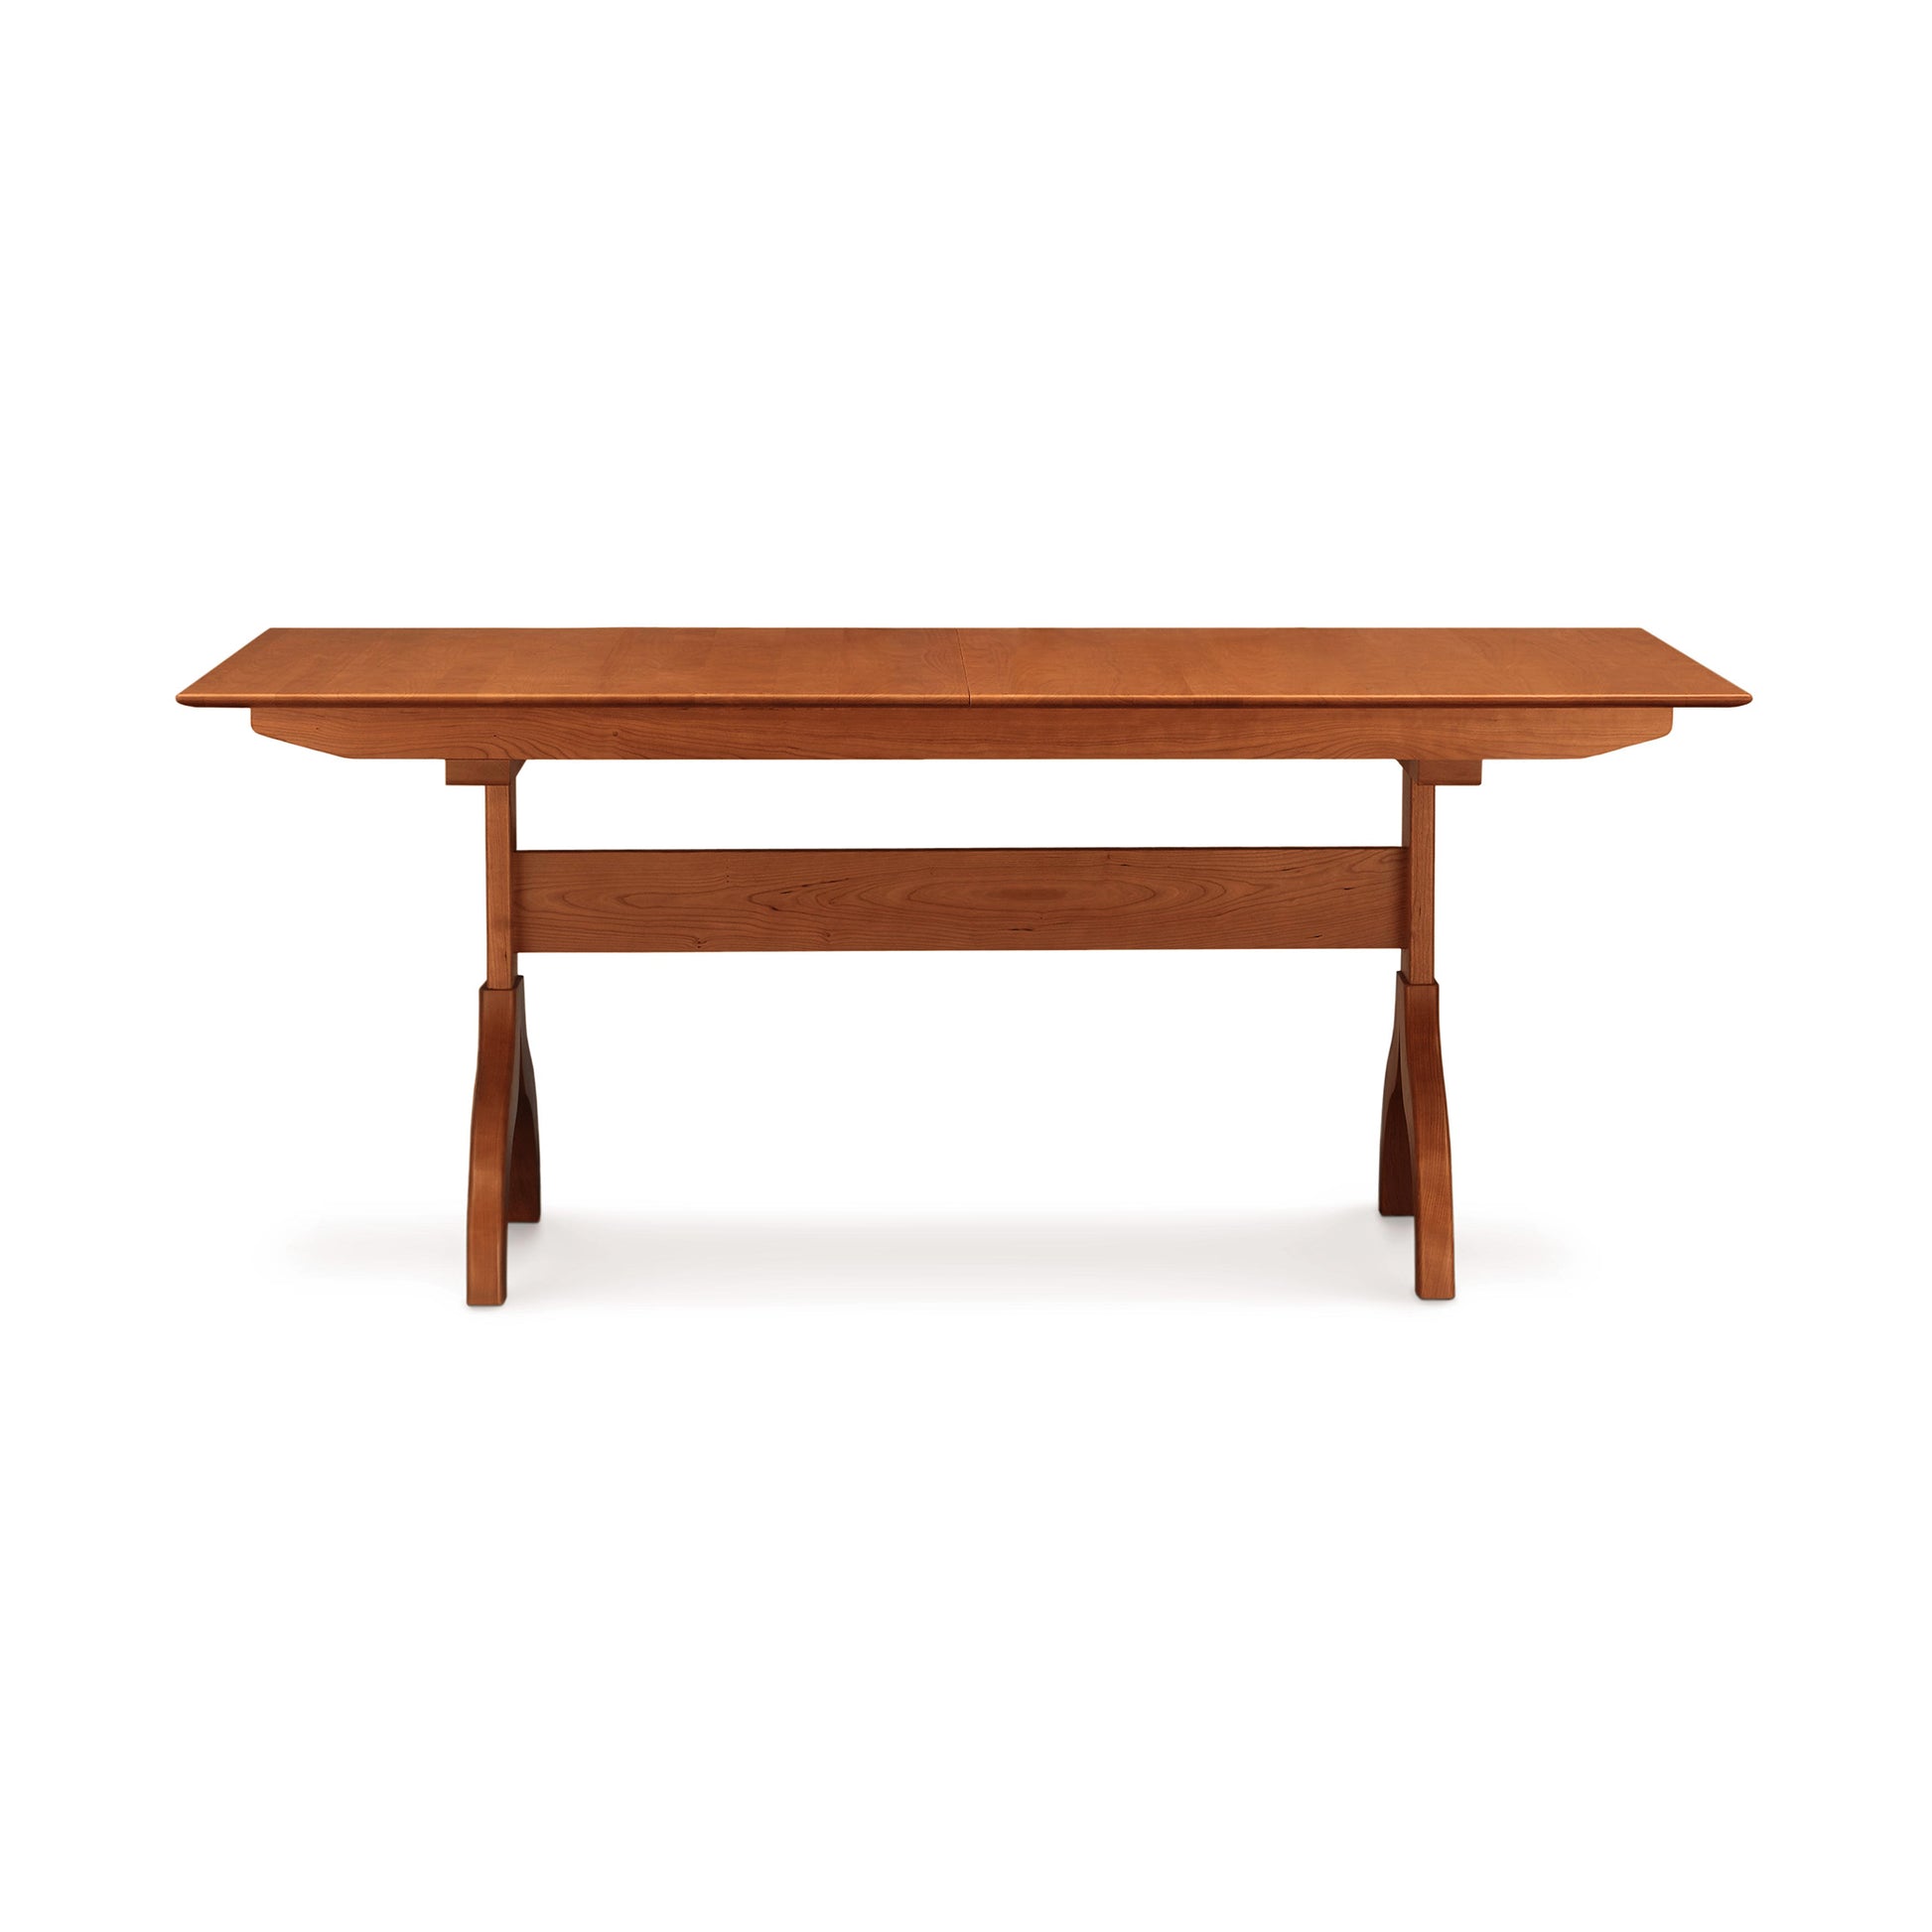 A Sarah Shaker Trestle Extension Table with drop-leaves against a white background.